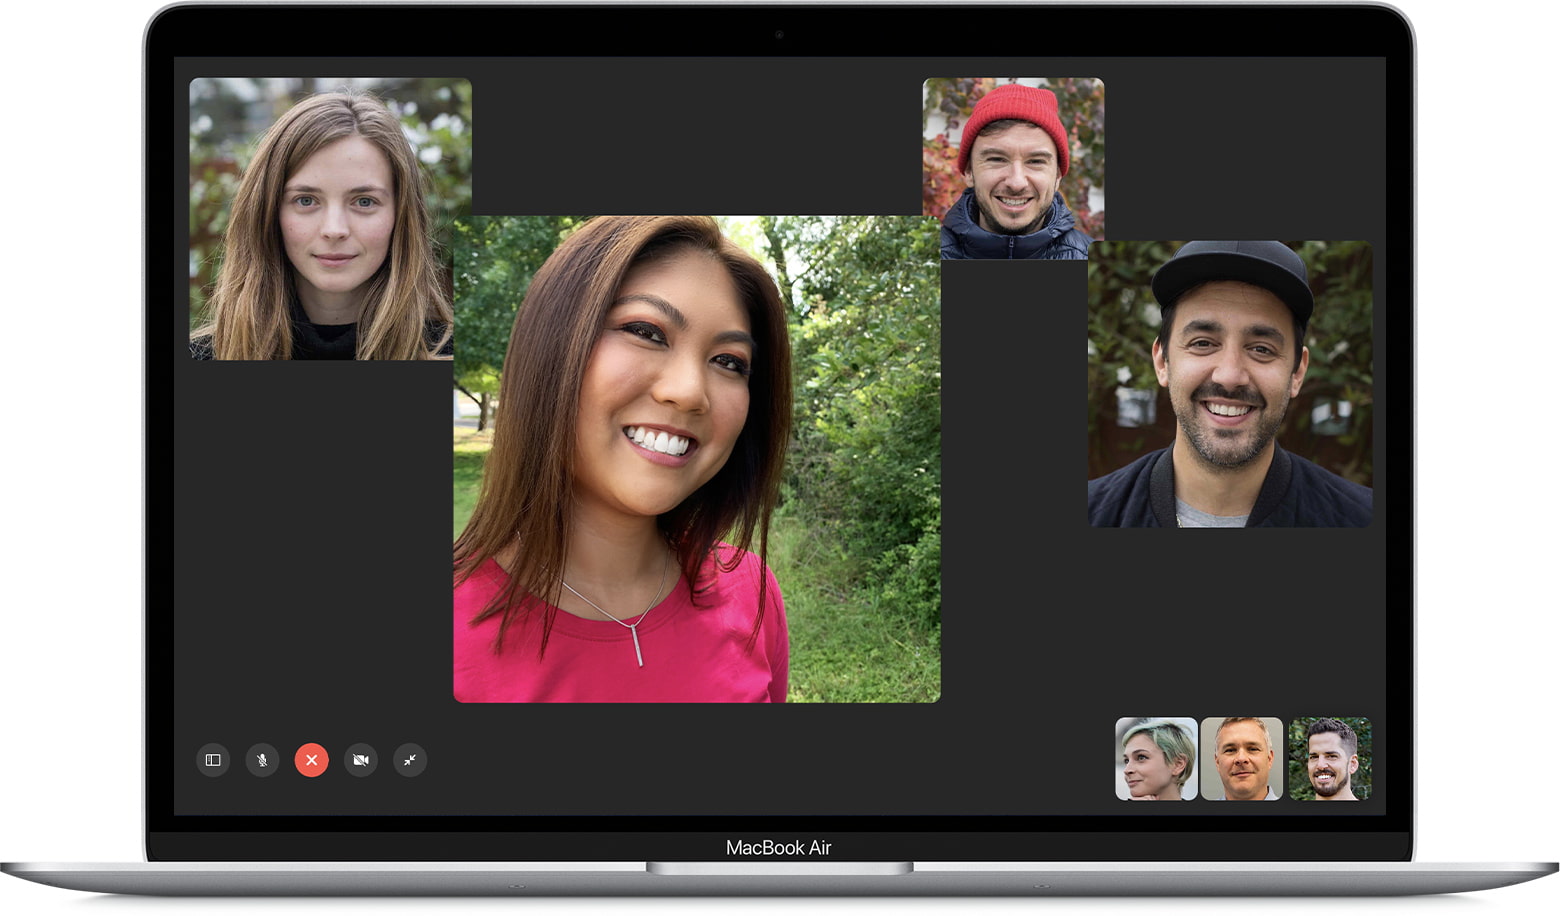 How to fix FaceTime not working on Mac